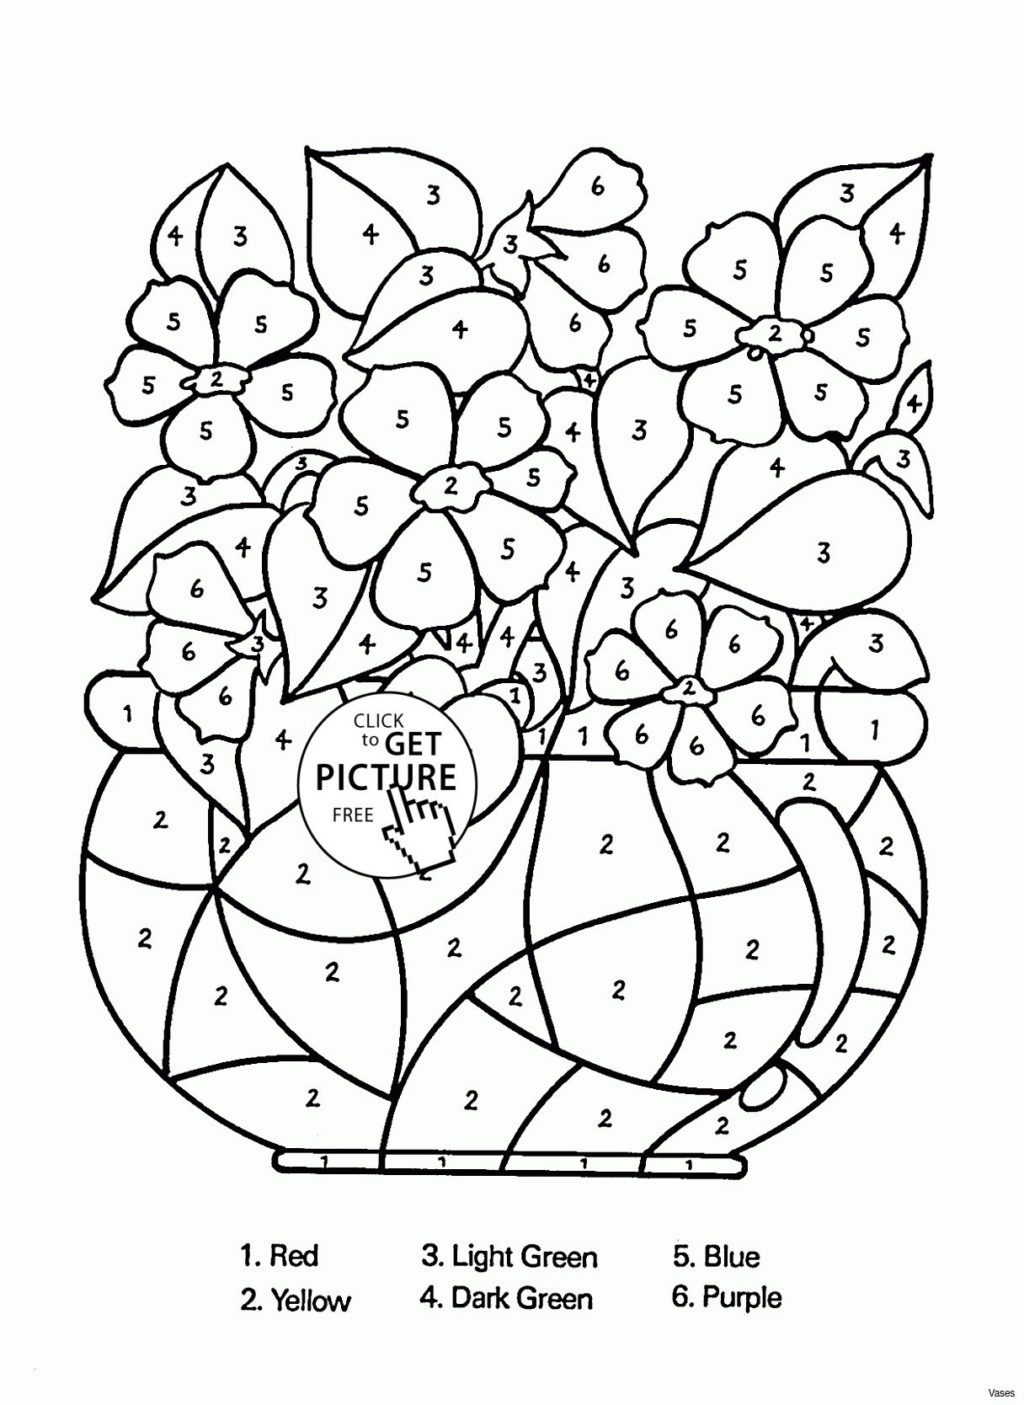 Fairy Queen Coloring Pages Coloring Pages Free Printable Coloring Pages For 5 Year Olds